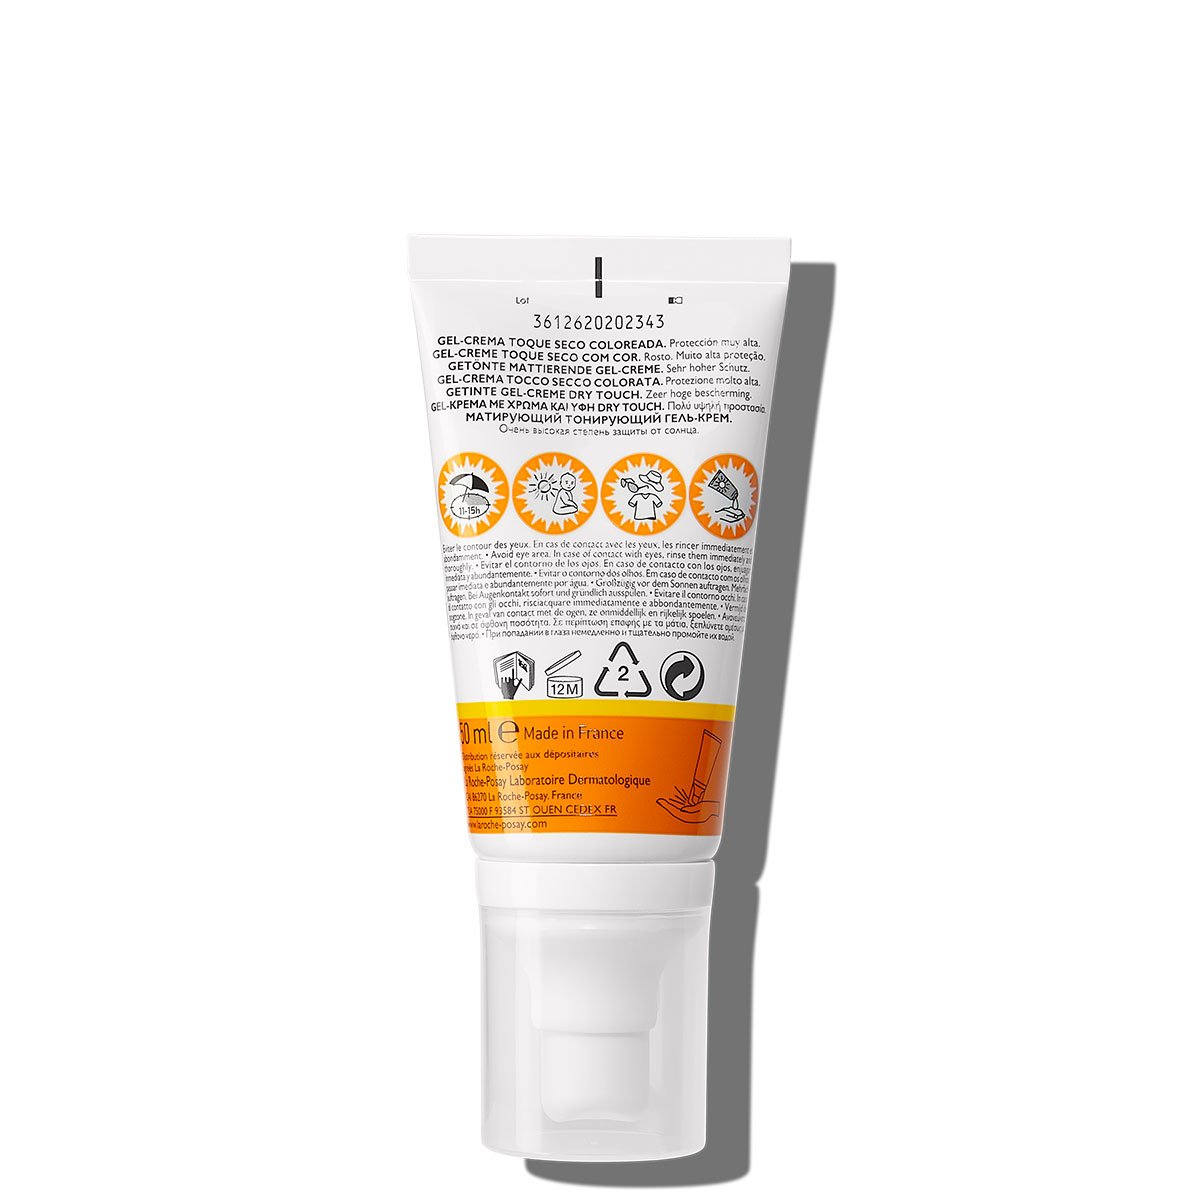 La Roche Posay ProductPage Sun Anthelios XL Tinted Dry Touch Cream Spf